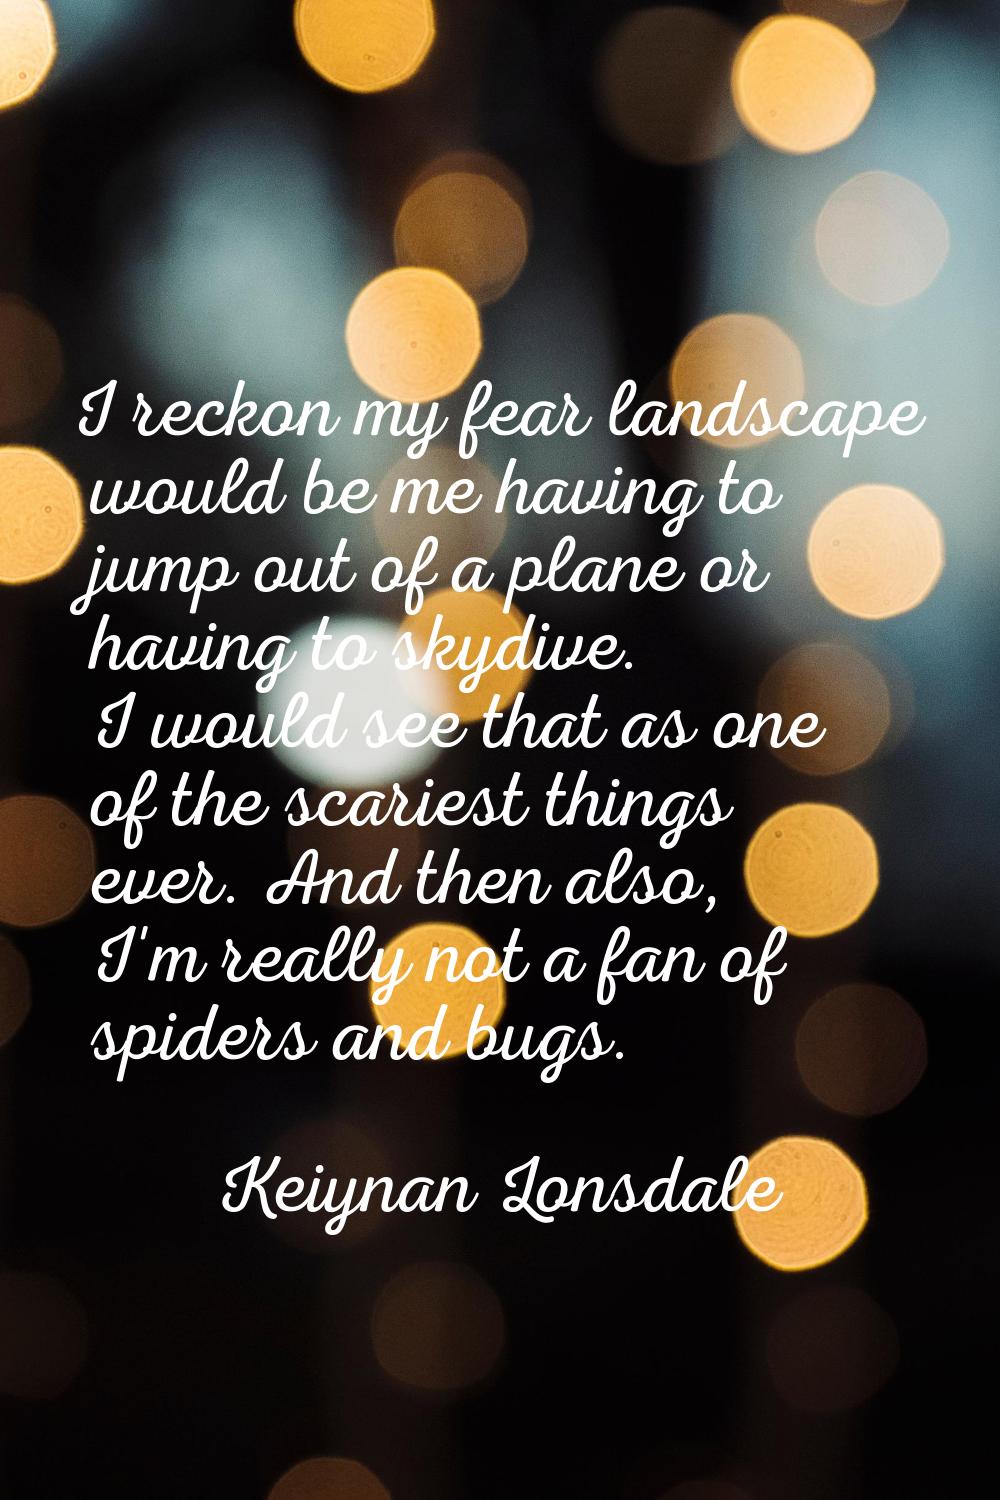 I reckon my fear landscape would be me having to jump out of a plane or having to skydive. I would 